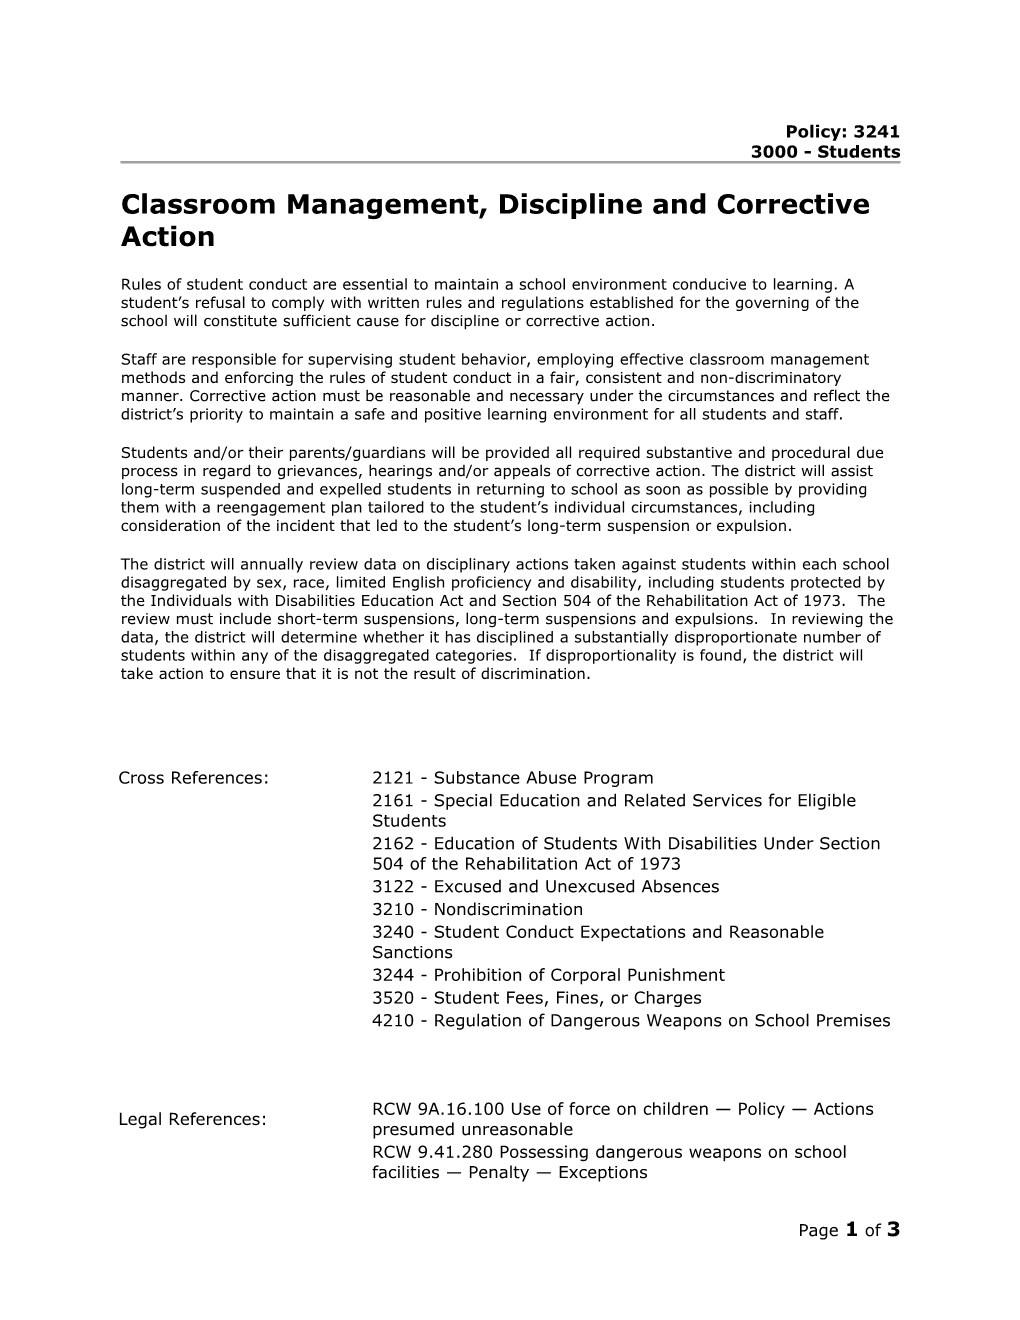 Classroom Management, Discipline and Corrective Action